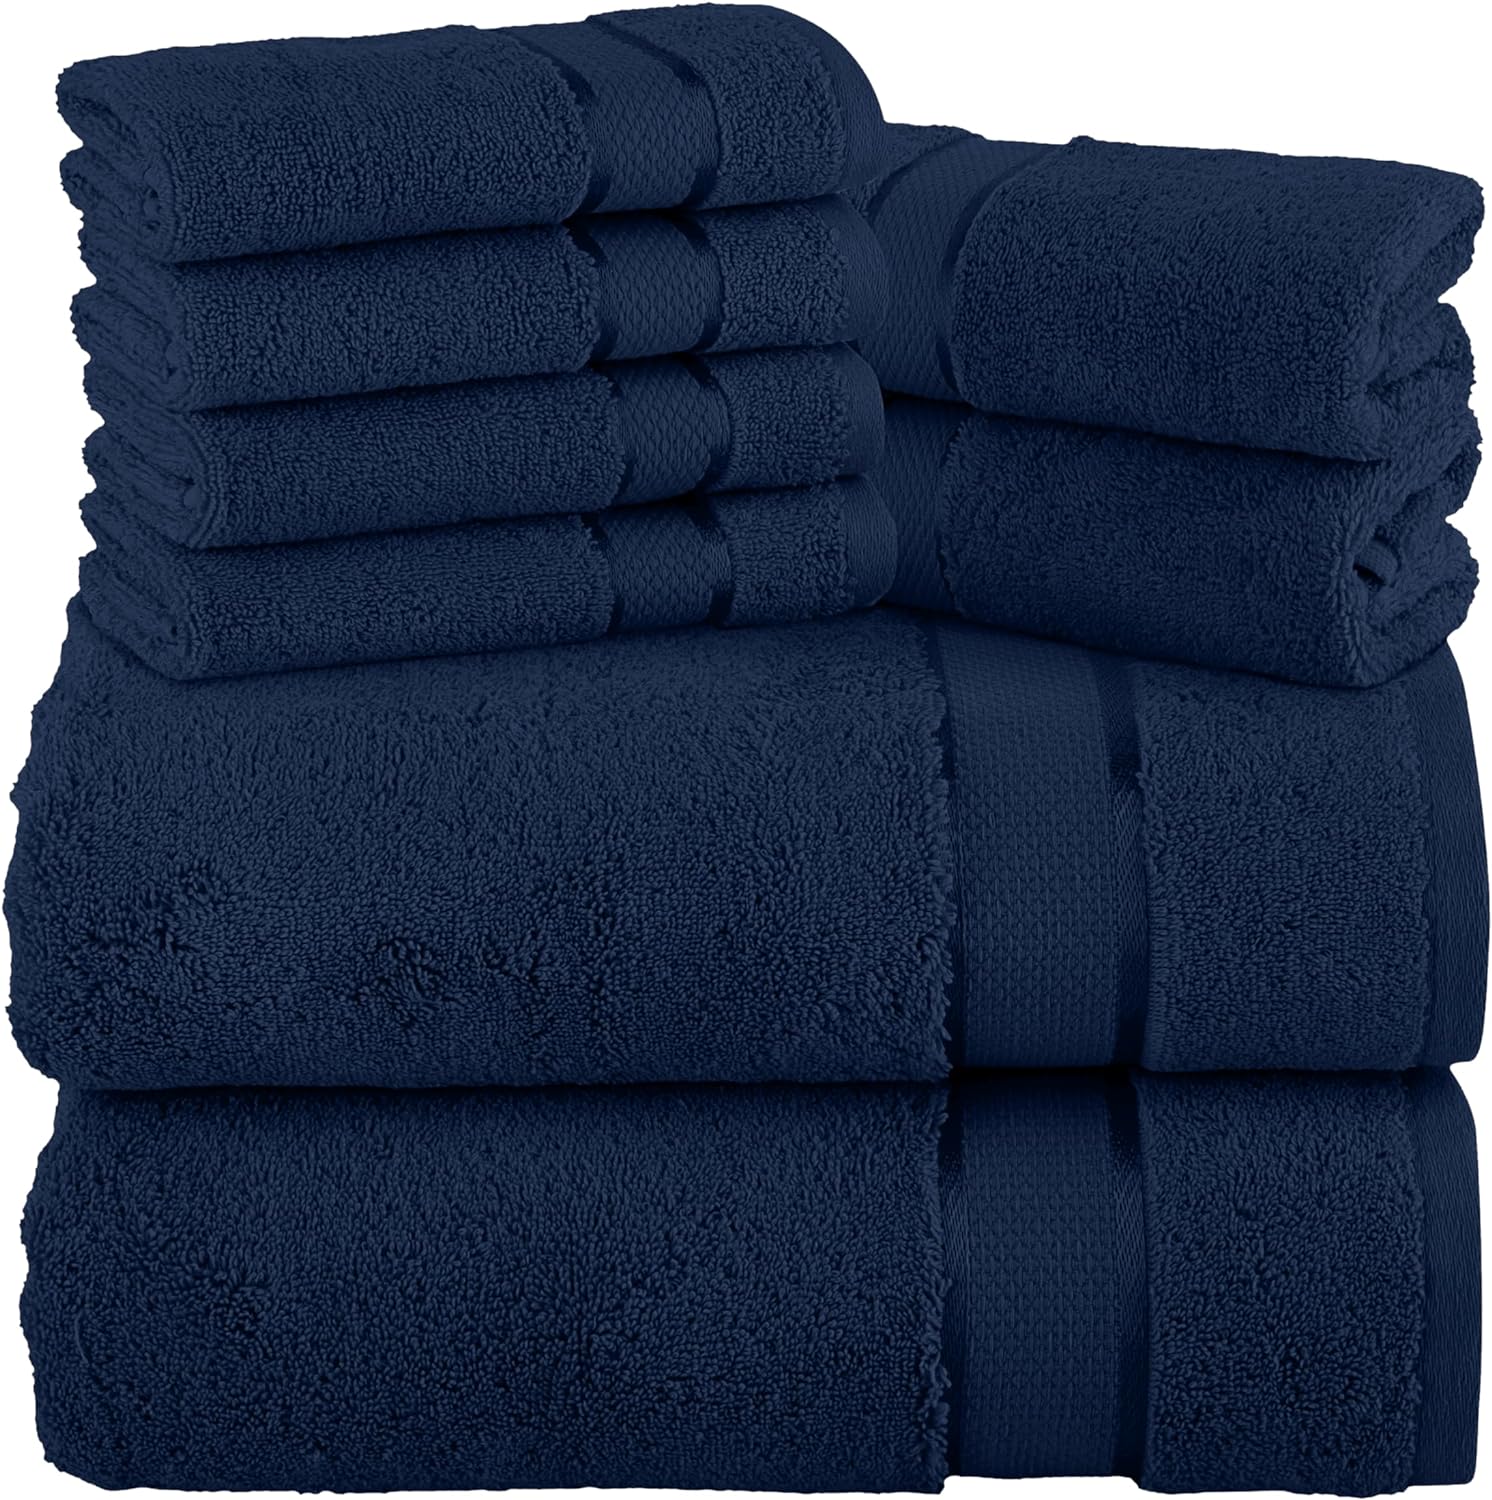 Home Labels 8 Pack Bath Towel Set Navy Blue for Kitchen and Bath - Premium 600 GSM 100% Ring-Spun Cotton 2 Bath Towels, 2 Hand Towels & 4 Washcloths - Quick Dry - Highly Absorbent - Perfect for Daily Use